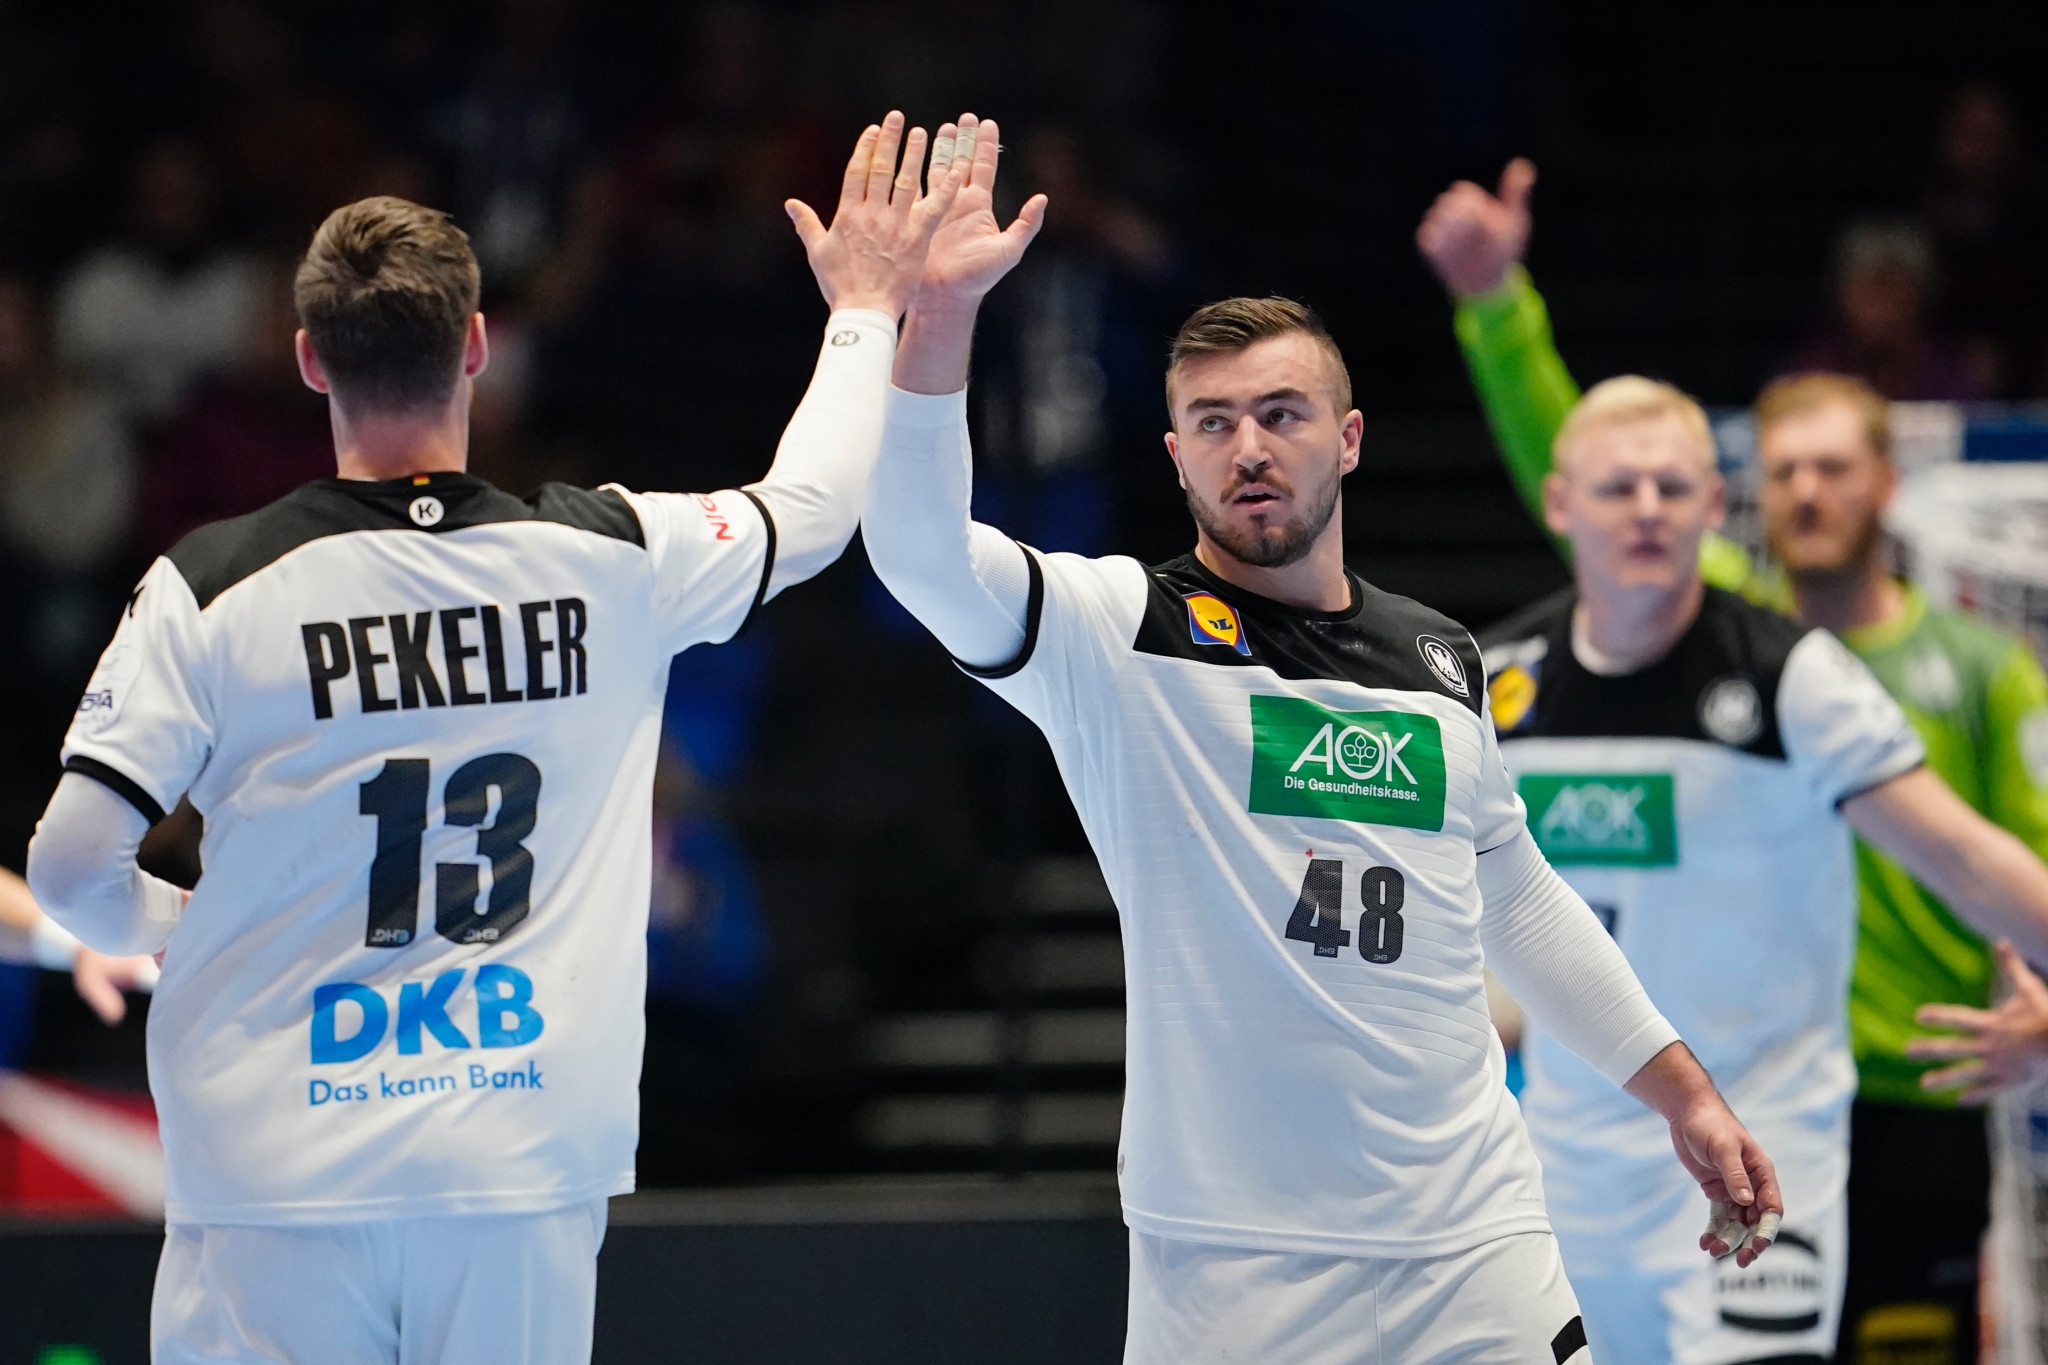 Germany secured their place in the men's European Handball Championship main round after winning a second successive preliminary round match today ©Getty Images